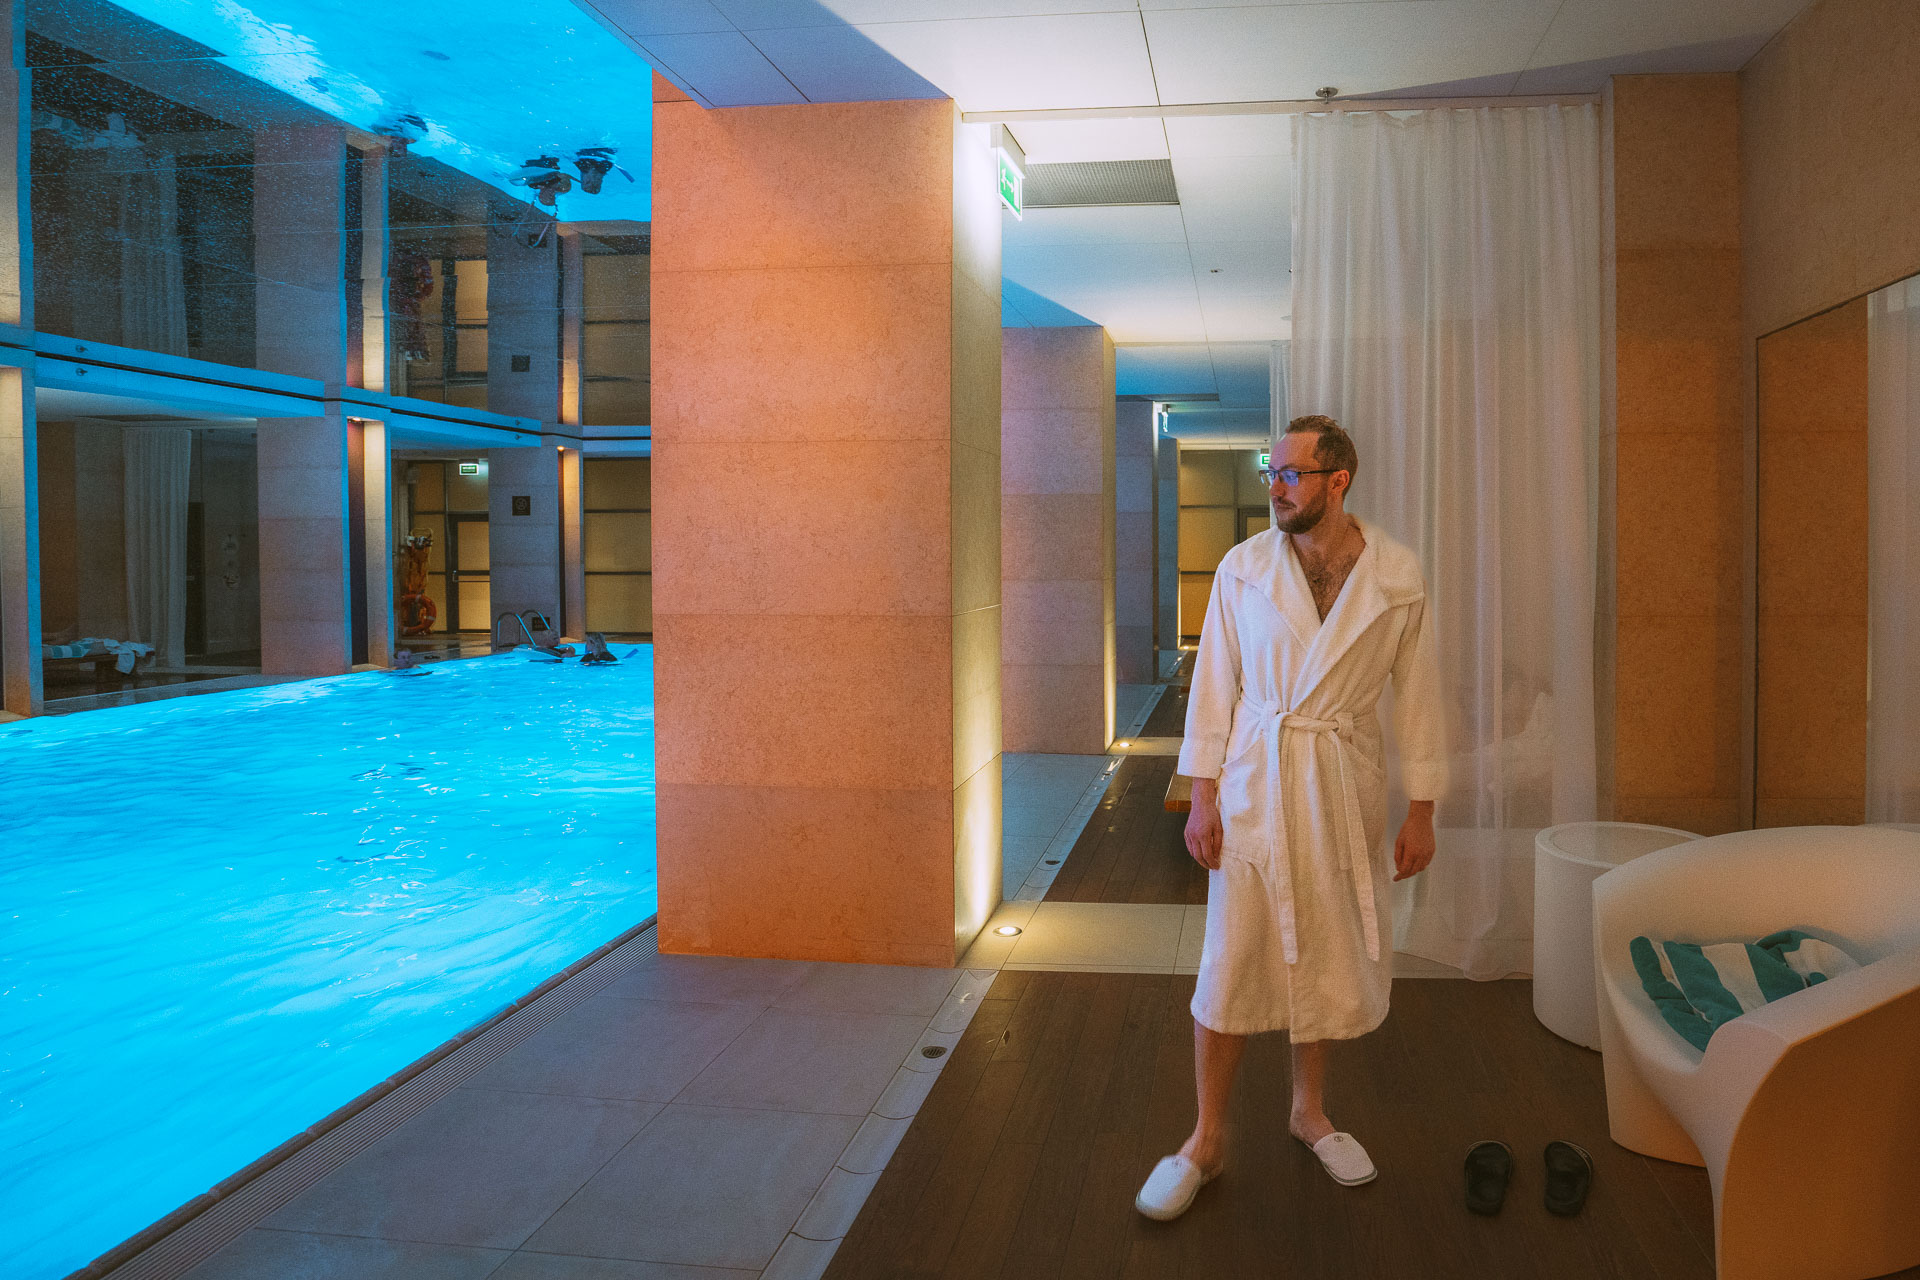 Poland Insiders photographer Andrzej is looking at the pool inside Sofitel hotel in Warsaw